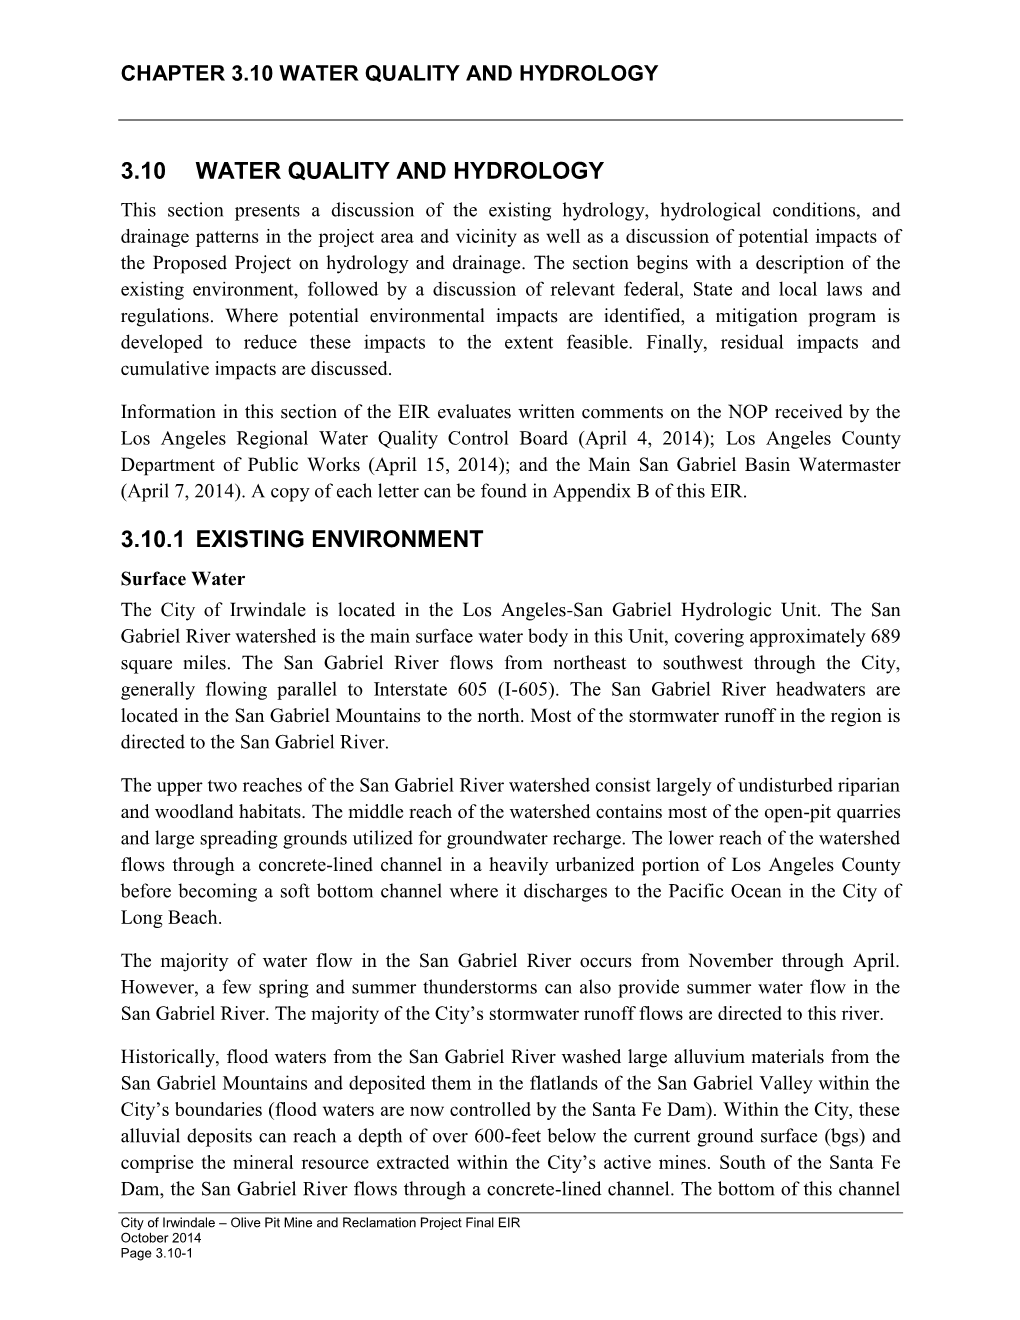 Chapter 3.10 Water Quality and Hydrology